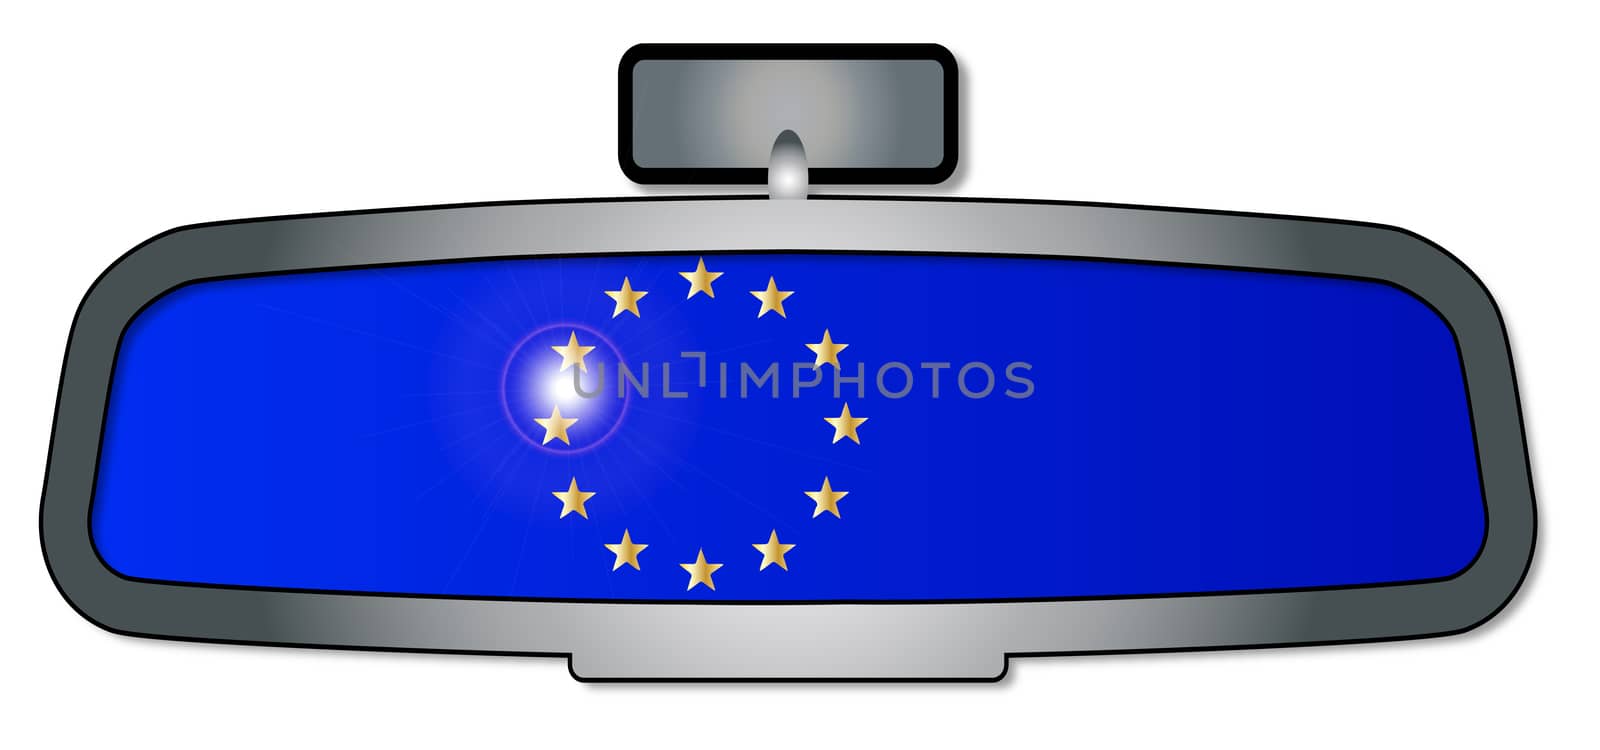 A vehicle rear view mirror with the flag of the EU